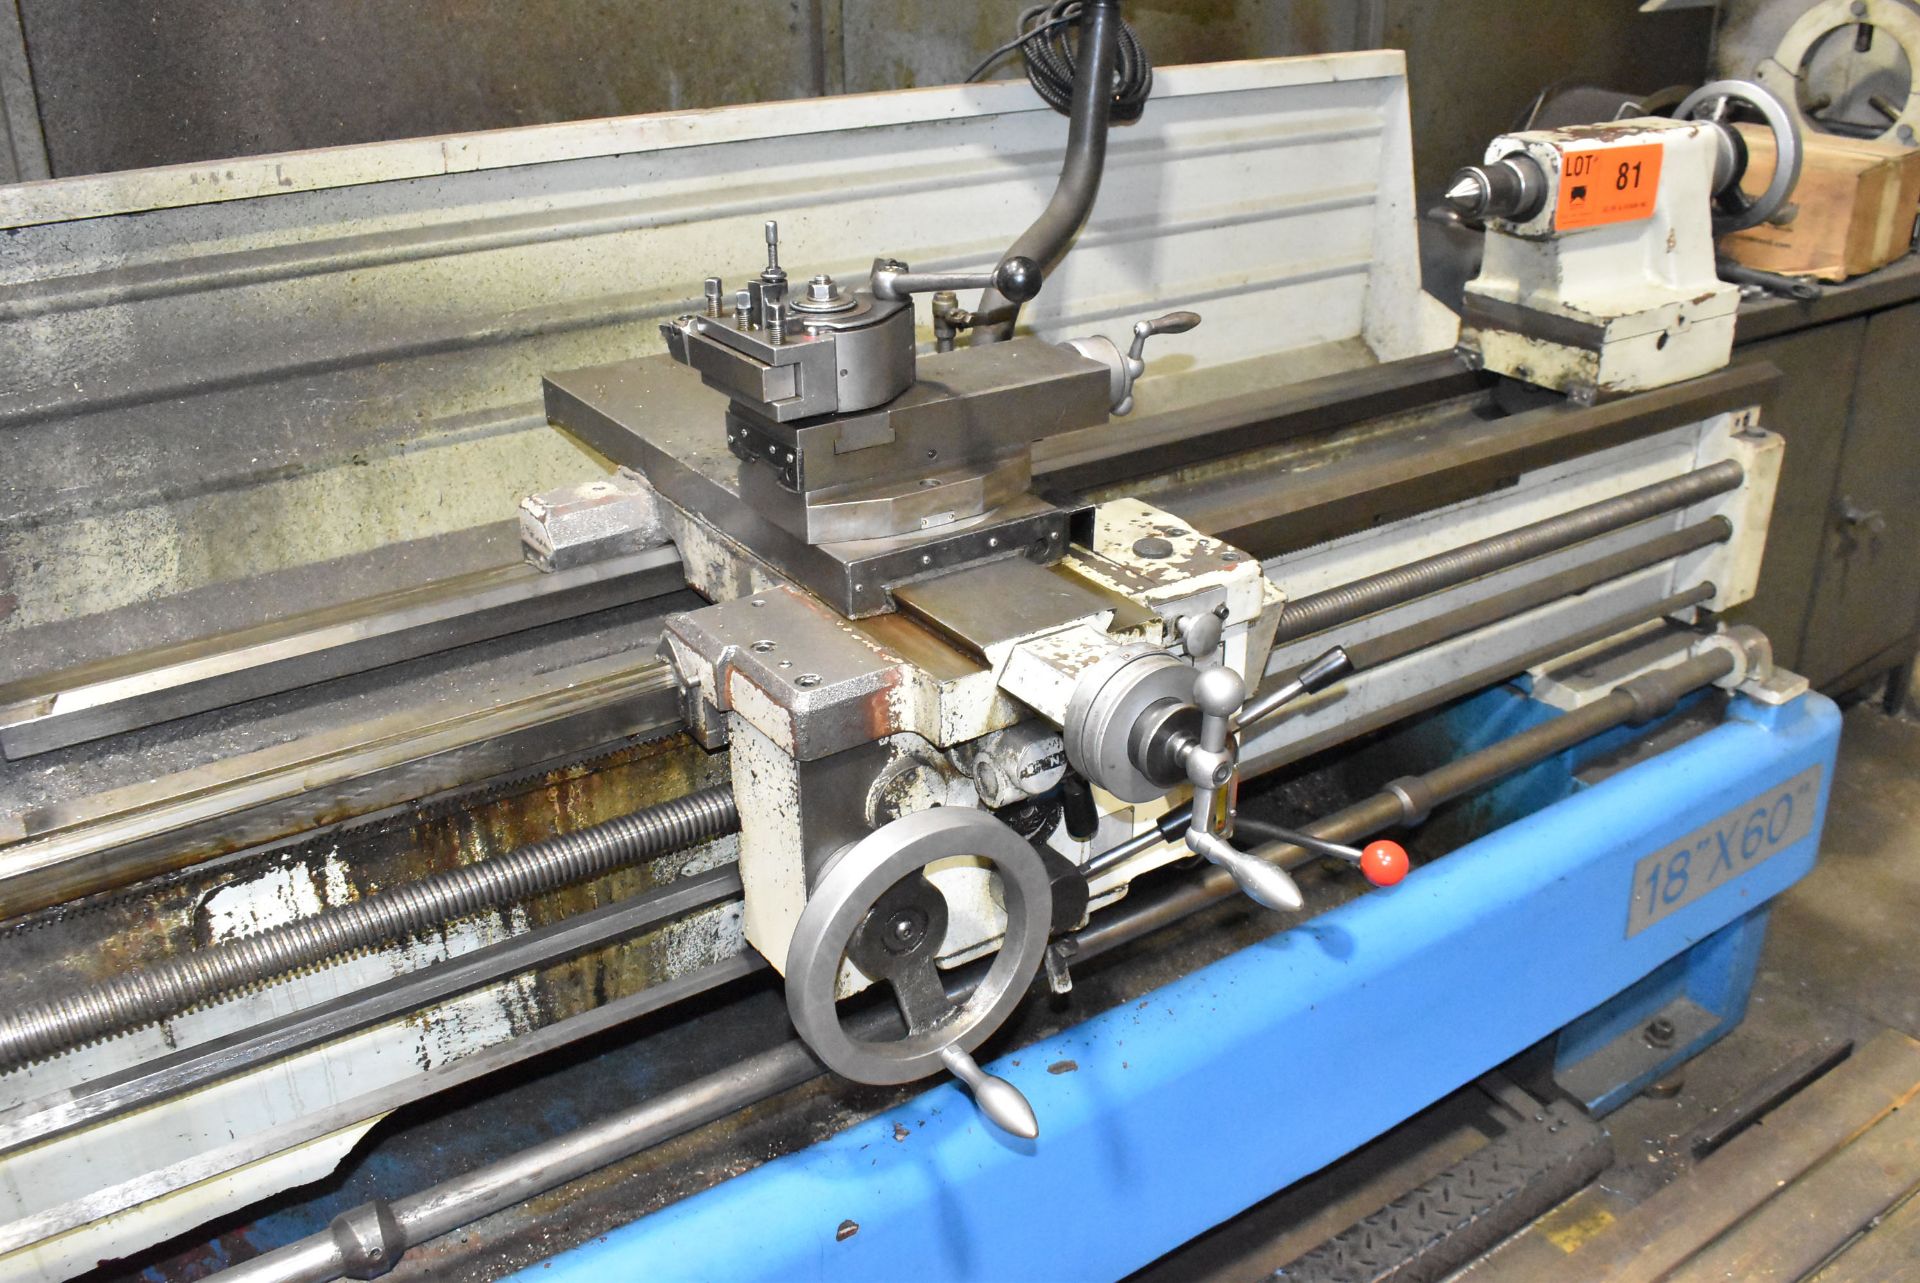 POWERTURN 18"X60" GAP BED ENGINE LATHE WITH 18" SWING OVER BED, 60" DISTANCE BETWEEN CENTERS, SPEEDS - Image 3 of 11